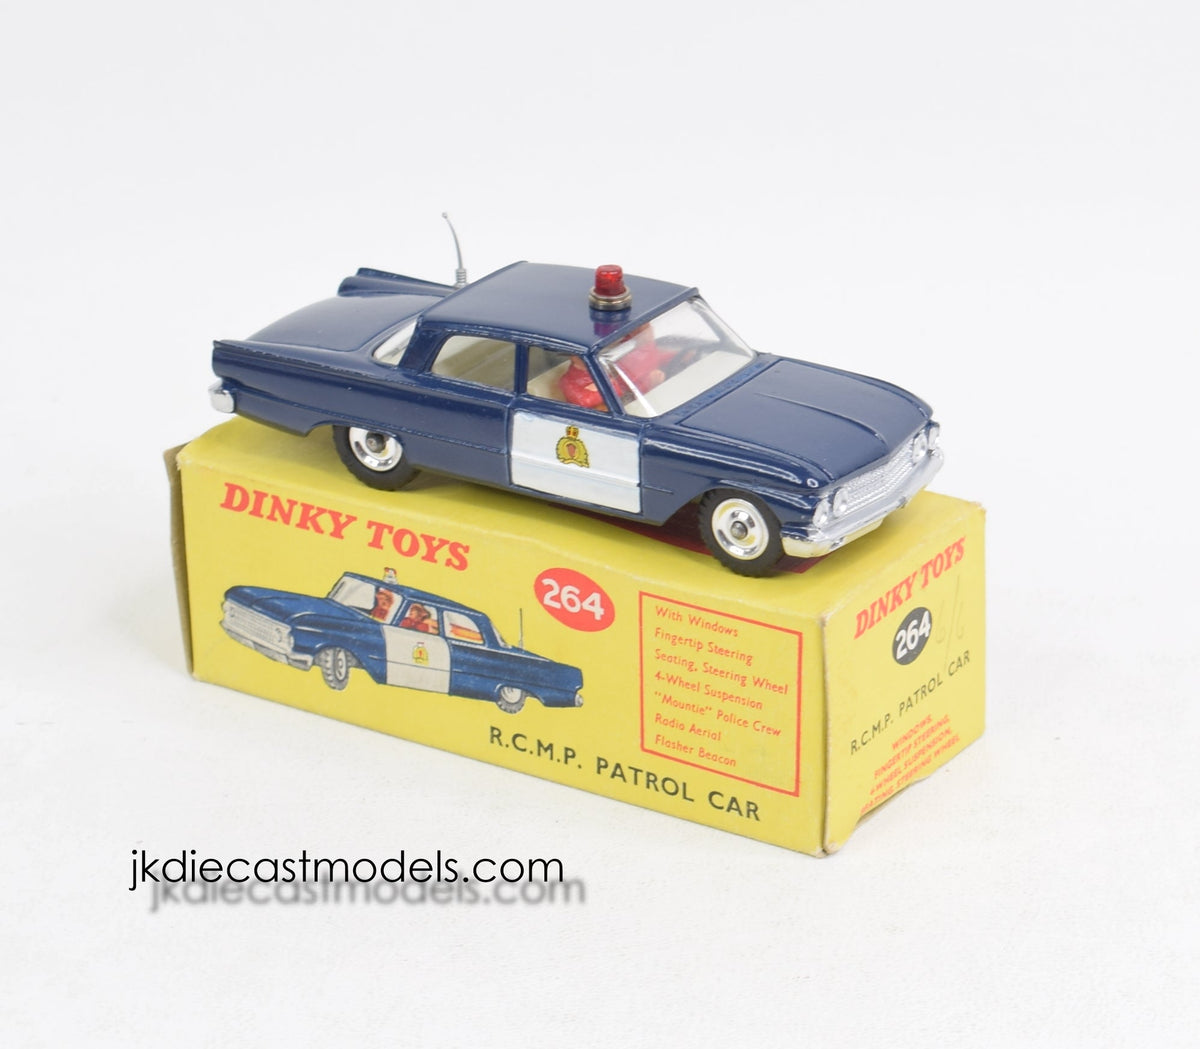 Dinky toys 264 R.C.M.P Patrol Virtually Mint/Nice boxed 'Lansdown Collection'